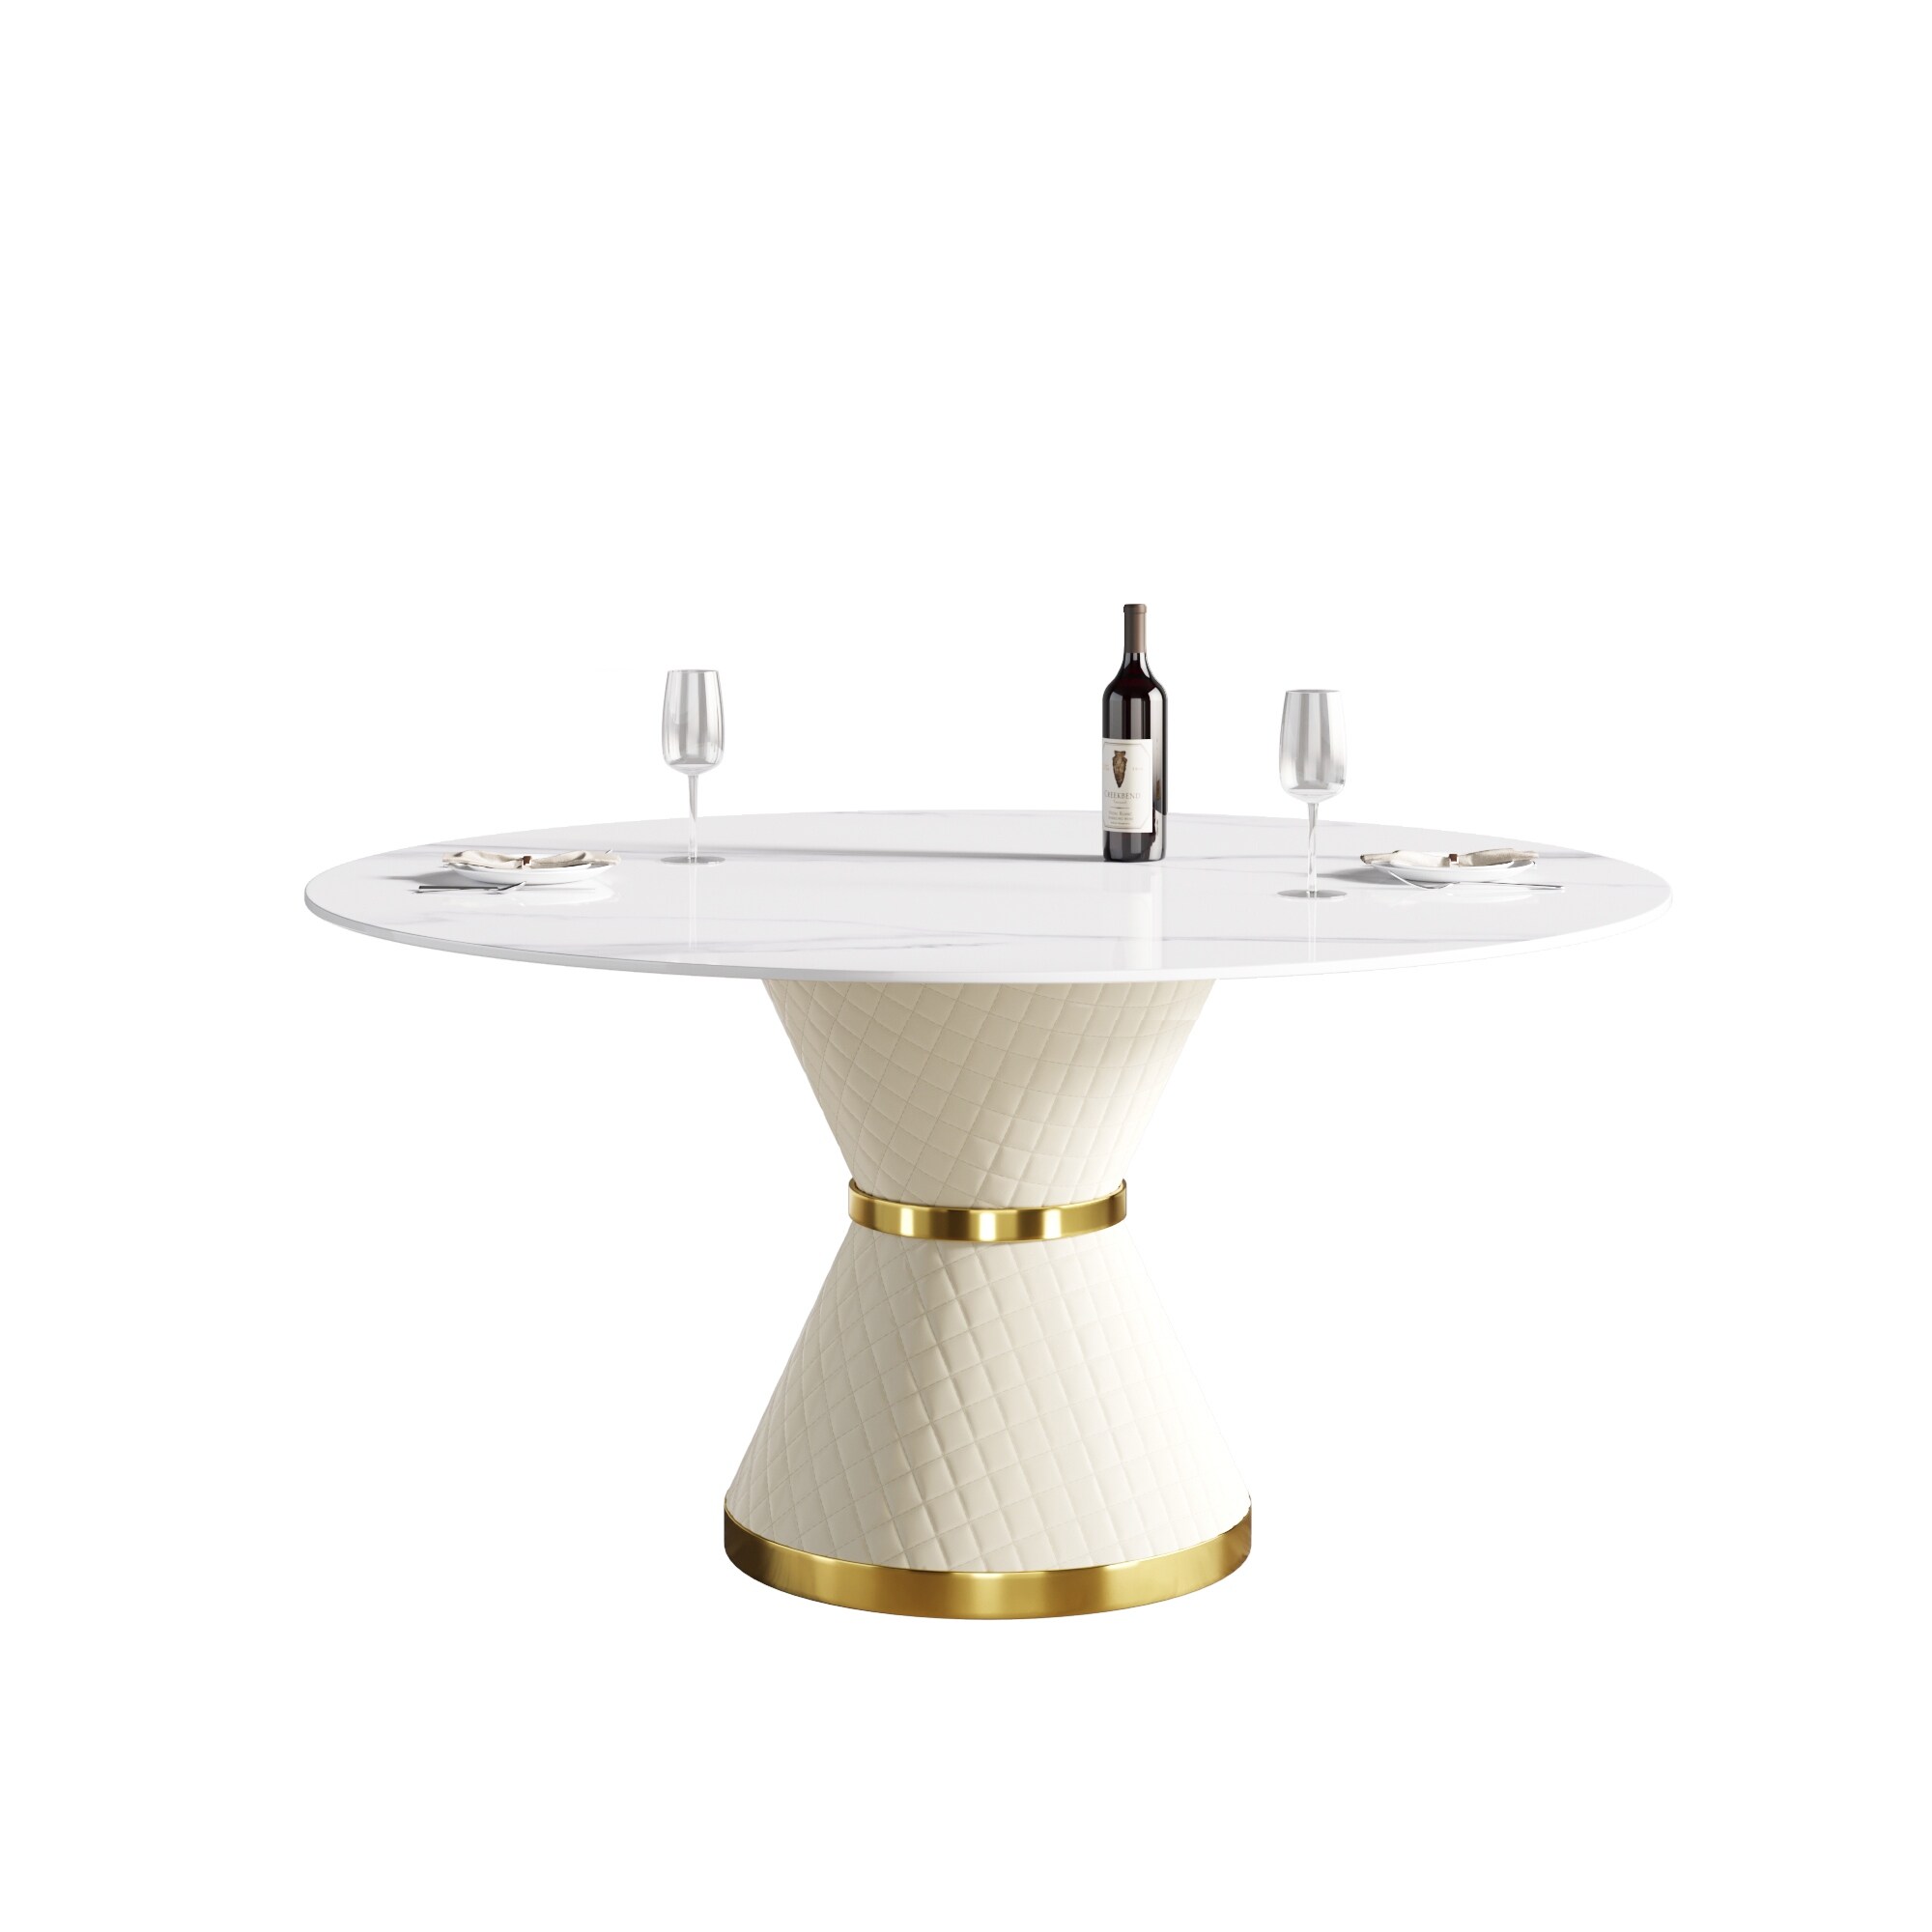 59" Modern White Marble Dining Table Round Table with Pedestal